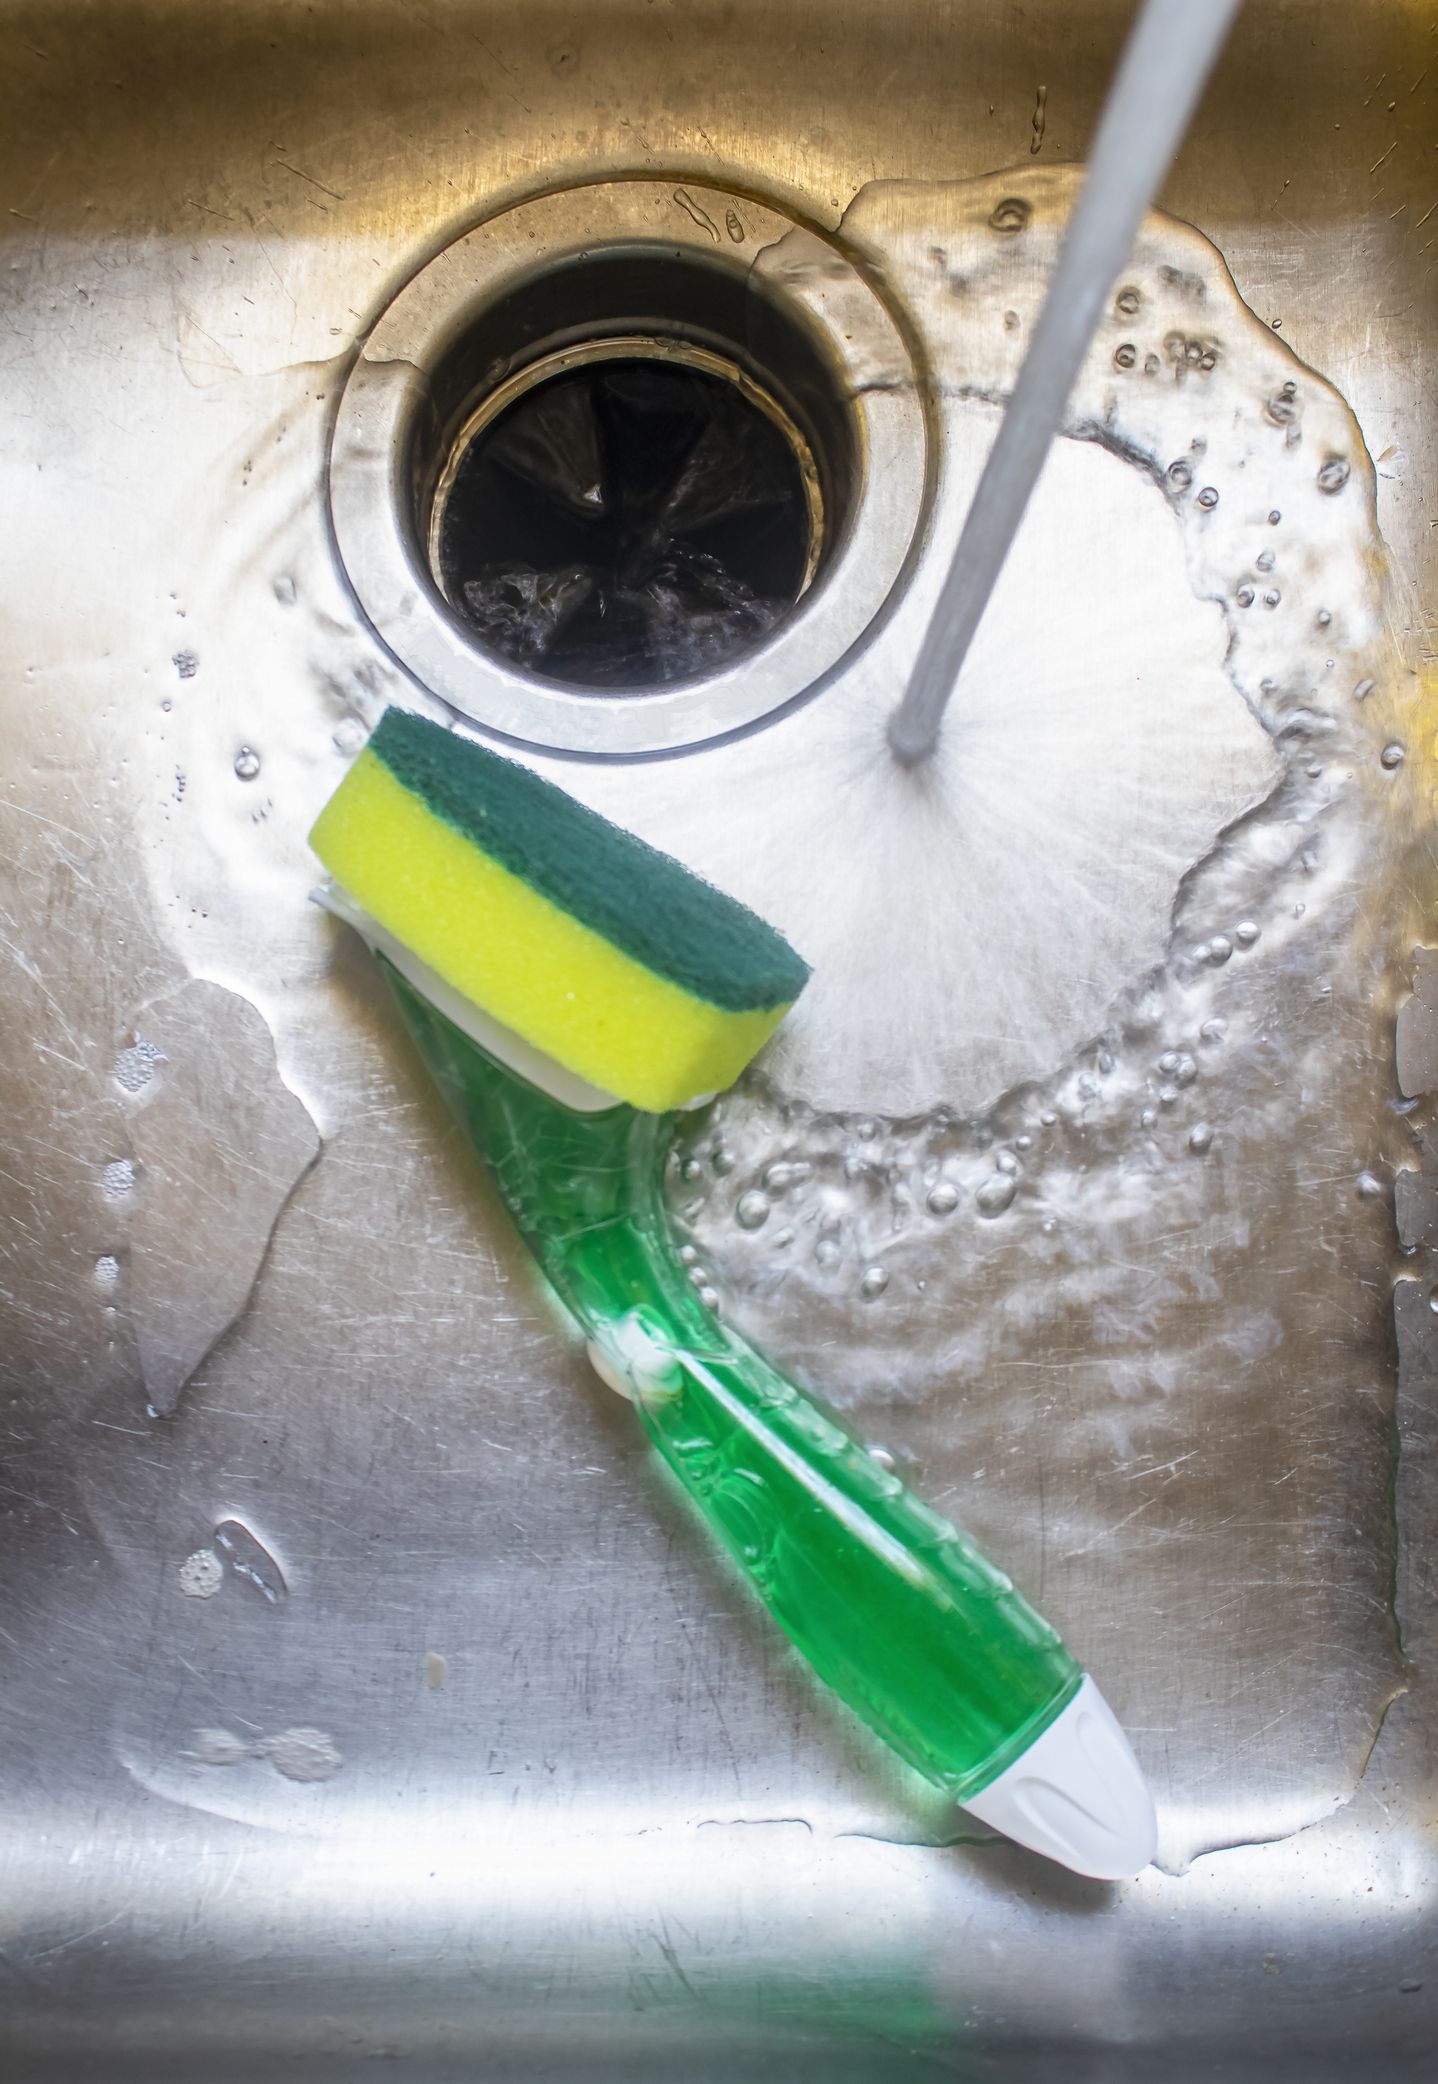 8 Best Homemade Cleaners - How to Make DIY All Purpose Cleaners